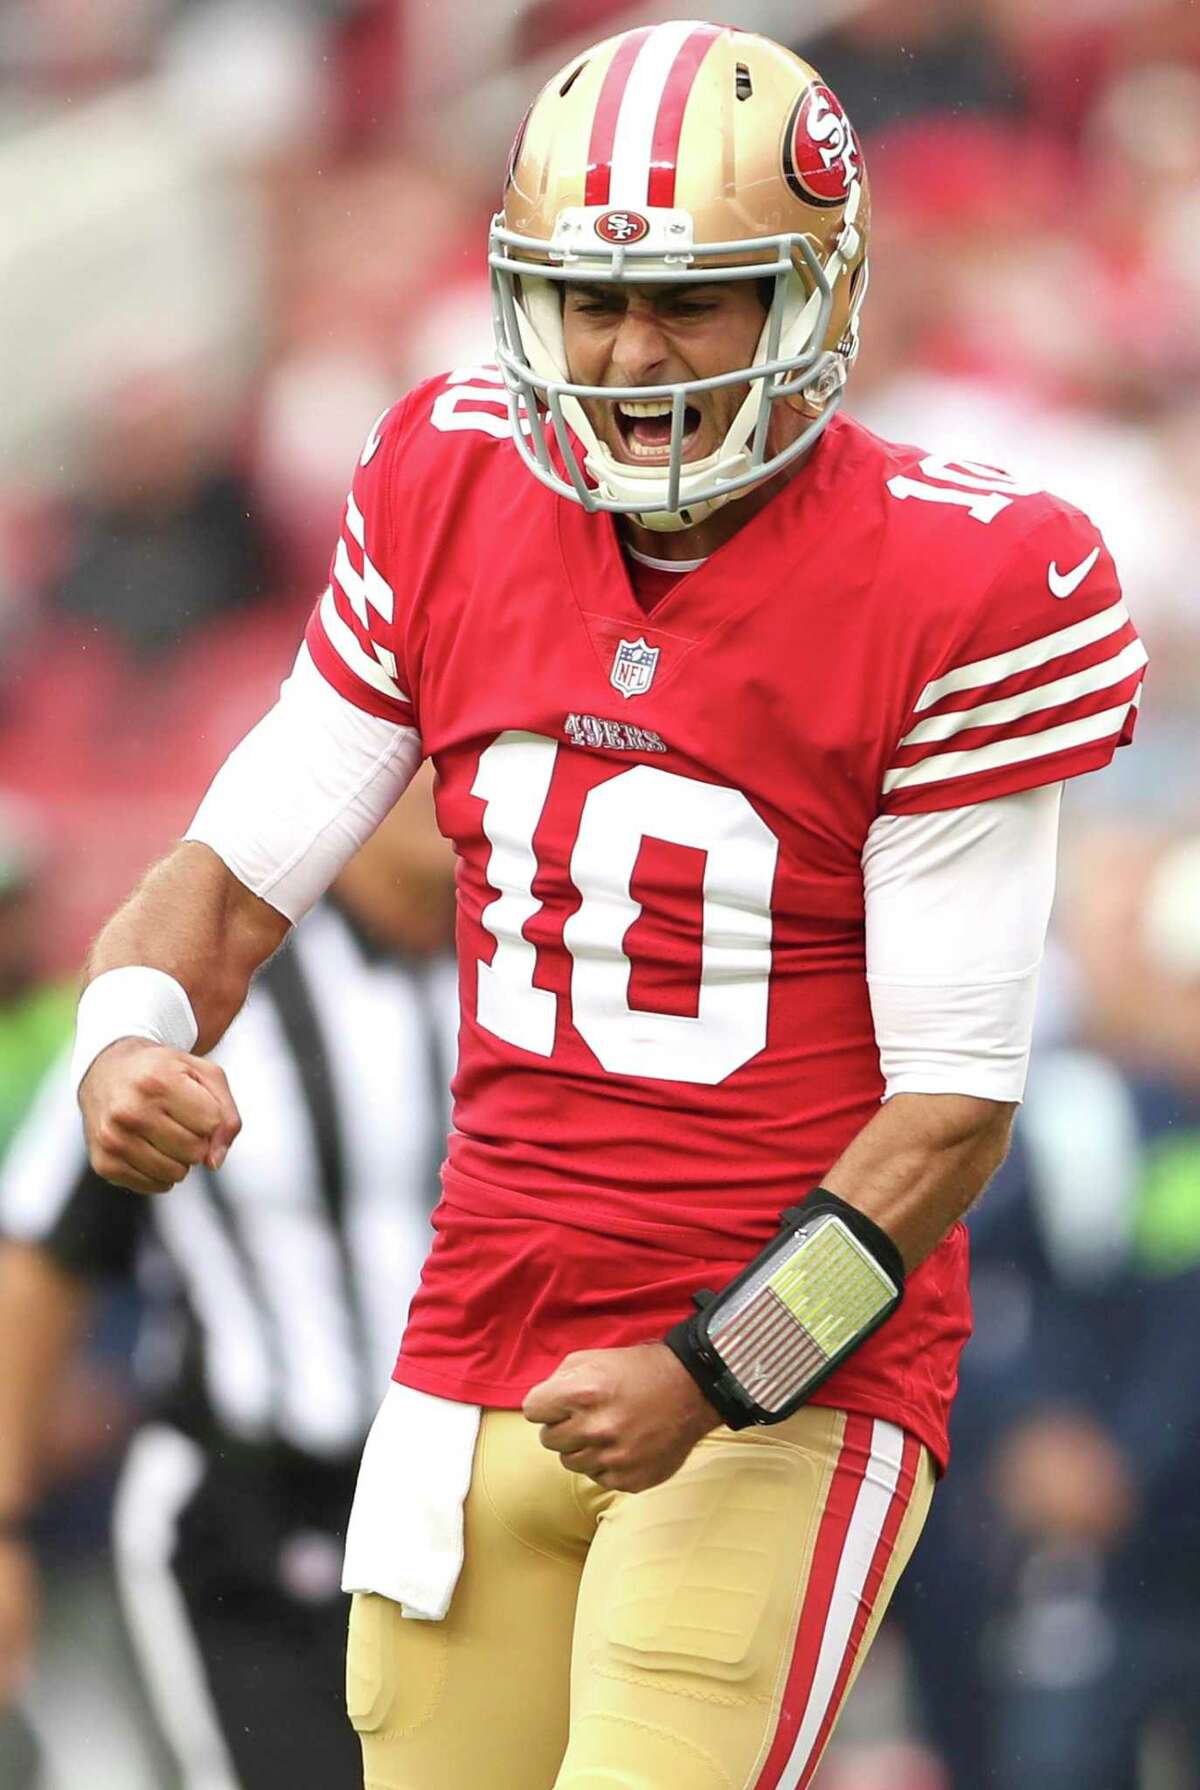 Battered, flawed, victorious: How Jimmy Garoppolo reflects 49ers' season